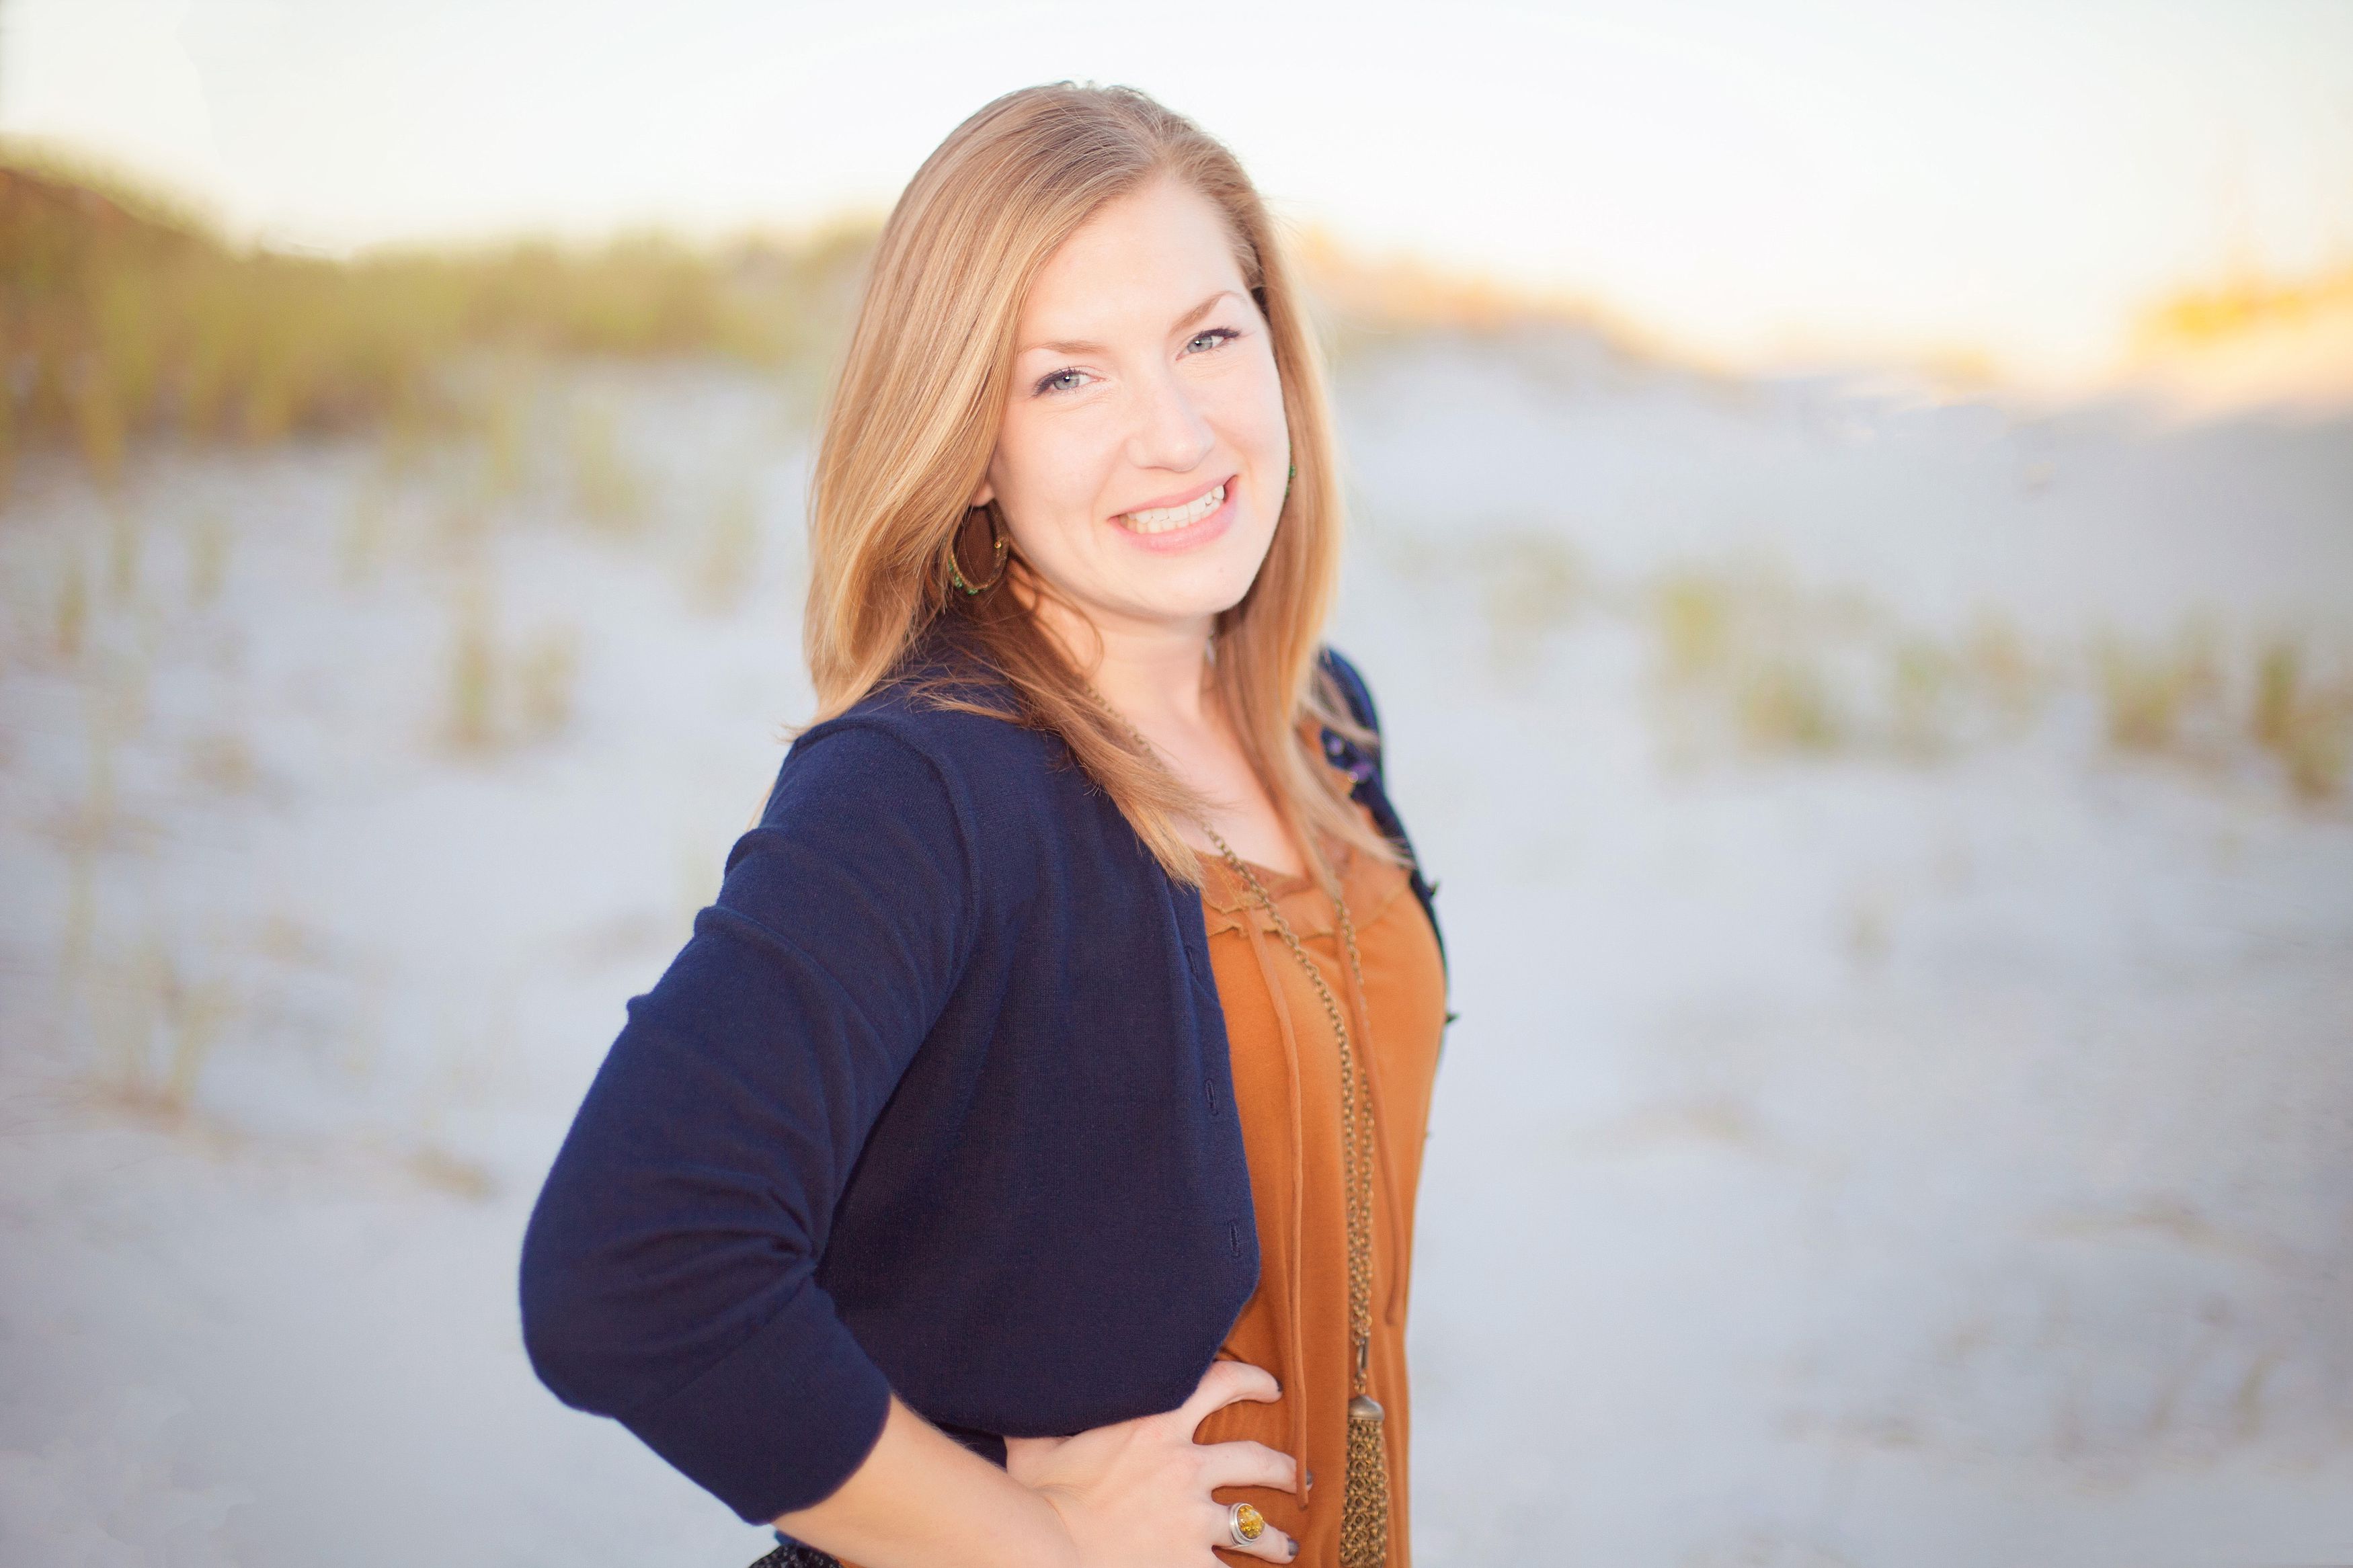 personal branding photo session at the beach in wrightsville beach, nc